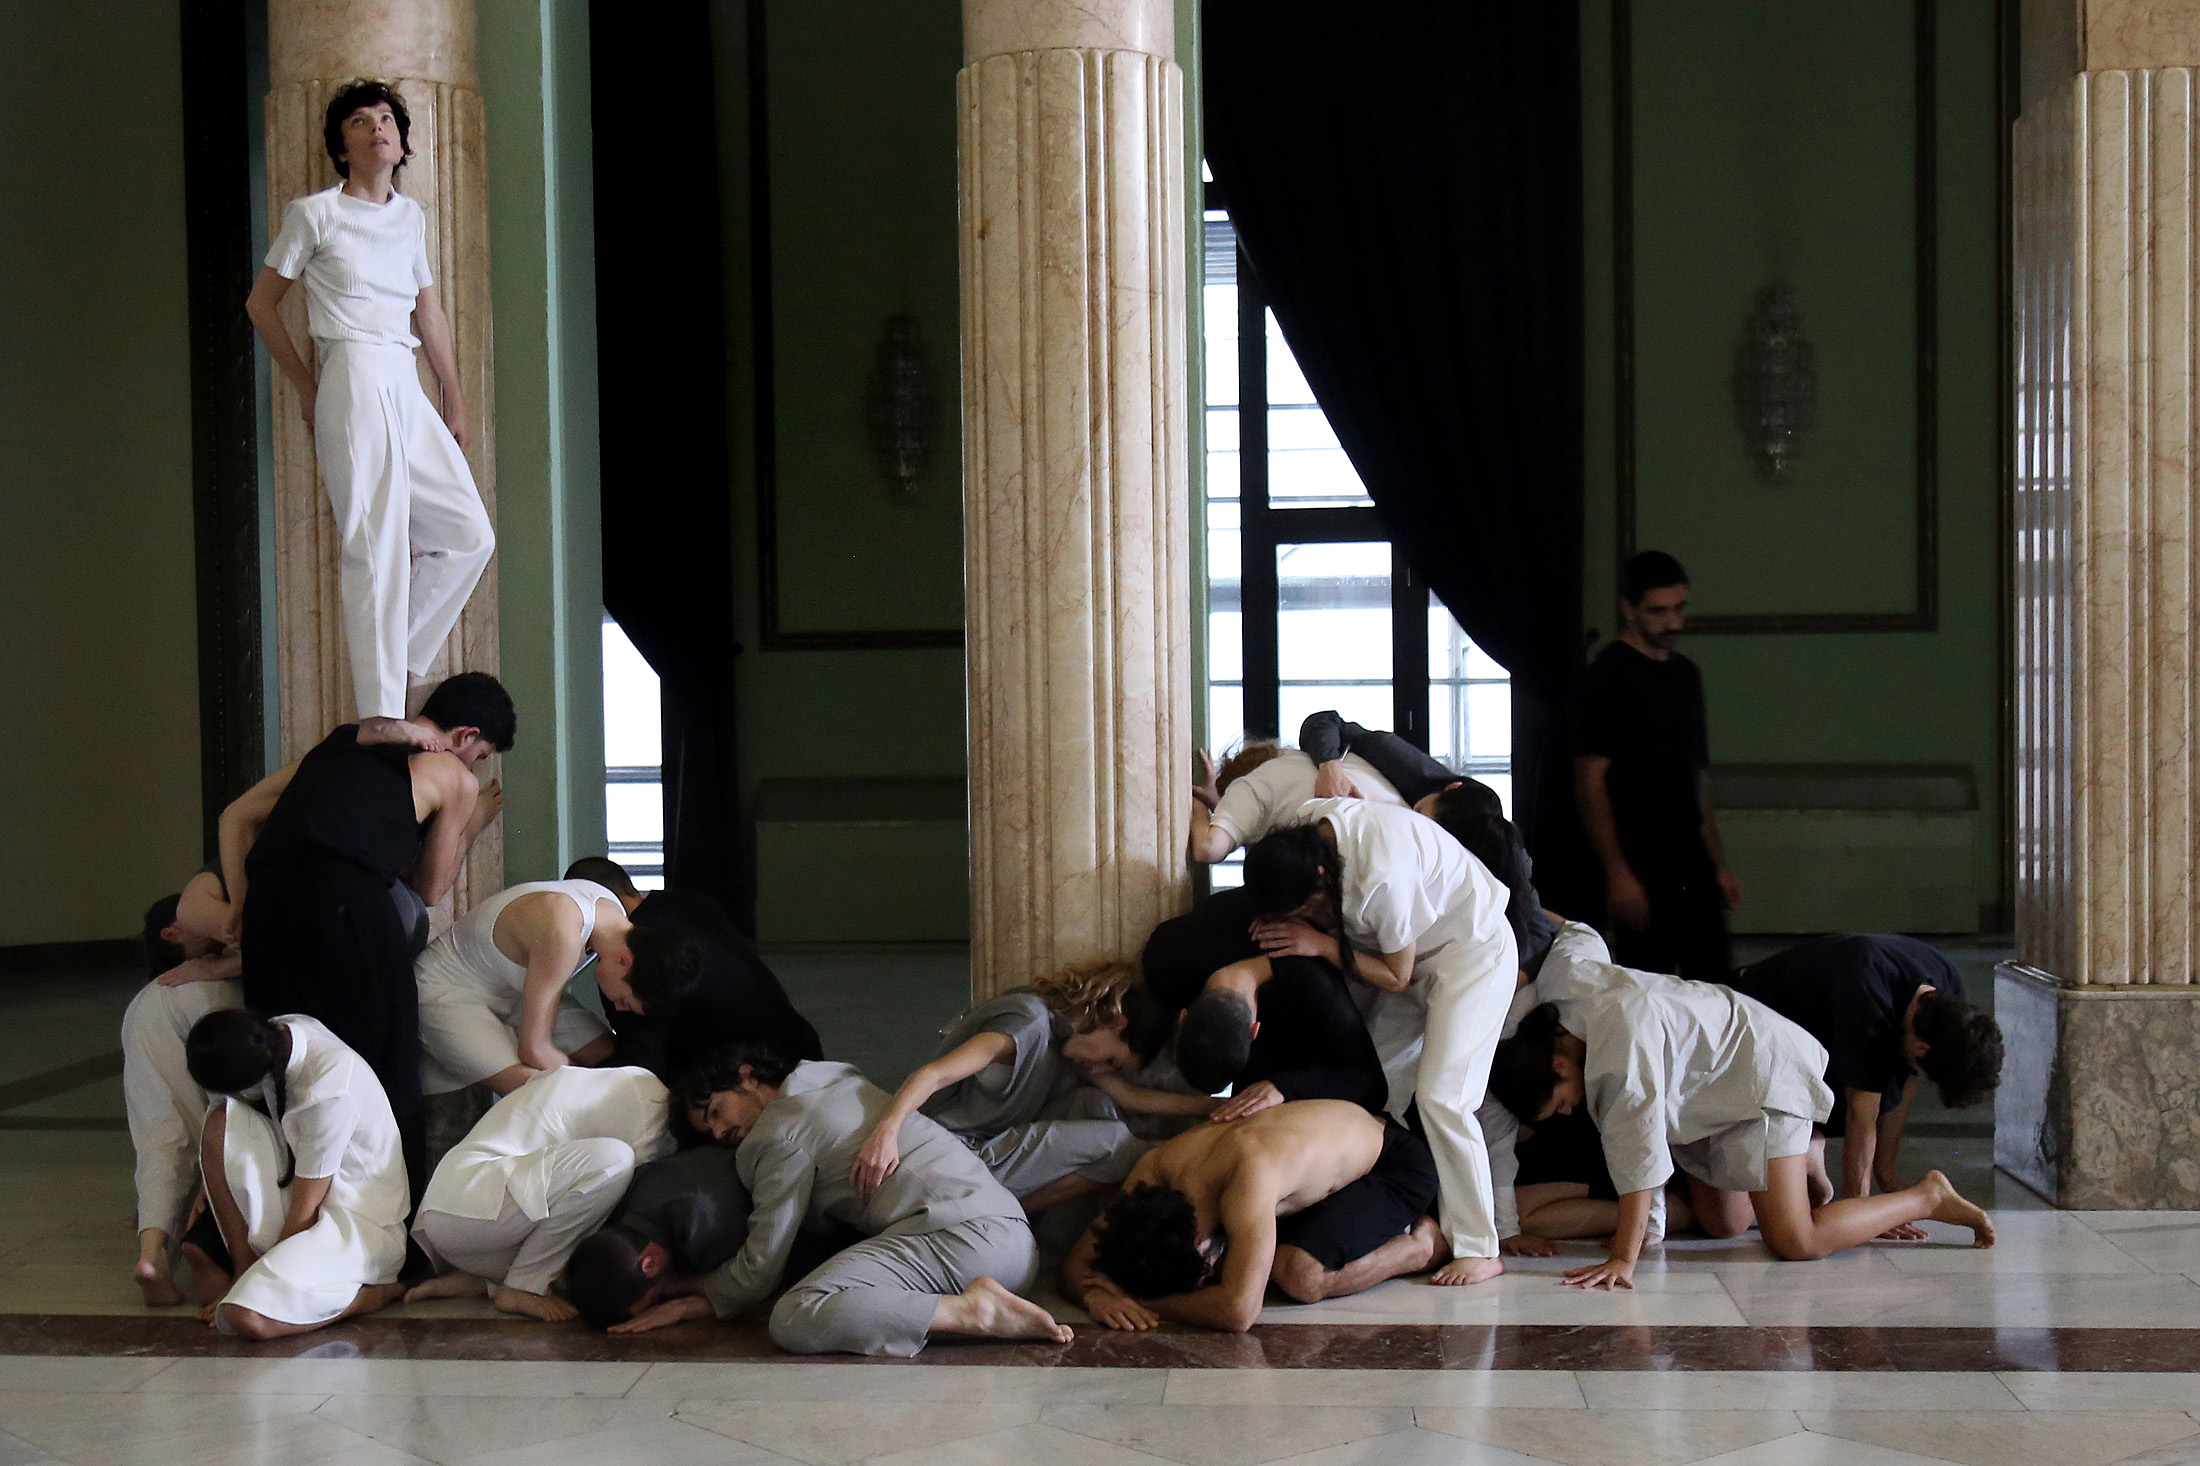 'Aún' returns to the Circulo de Bellas Artes in Madrid, with three unique screenings, on the occasion of International Dance Day